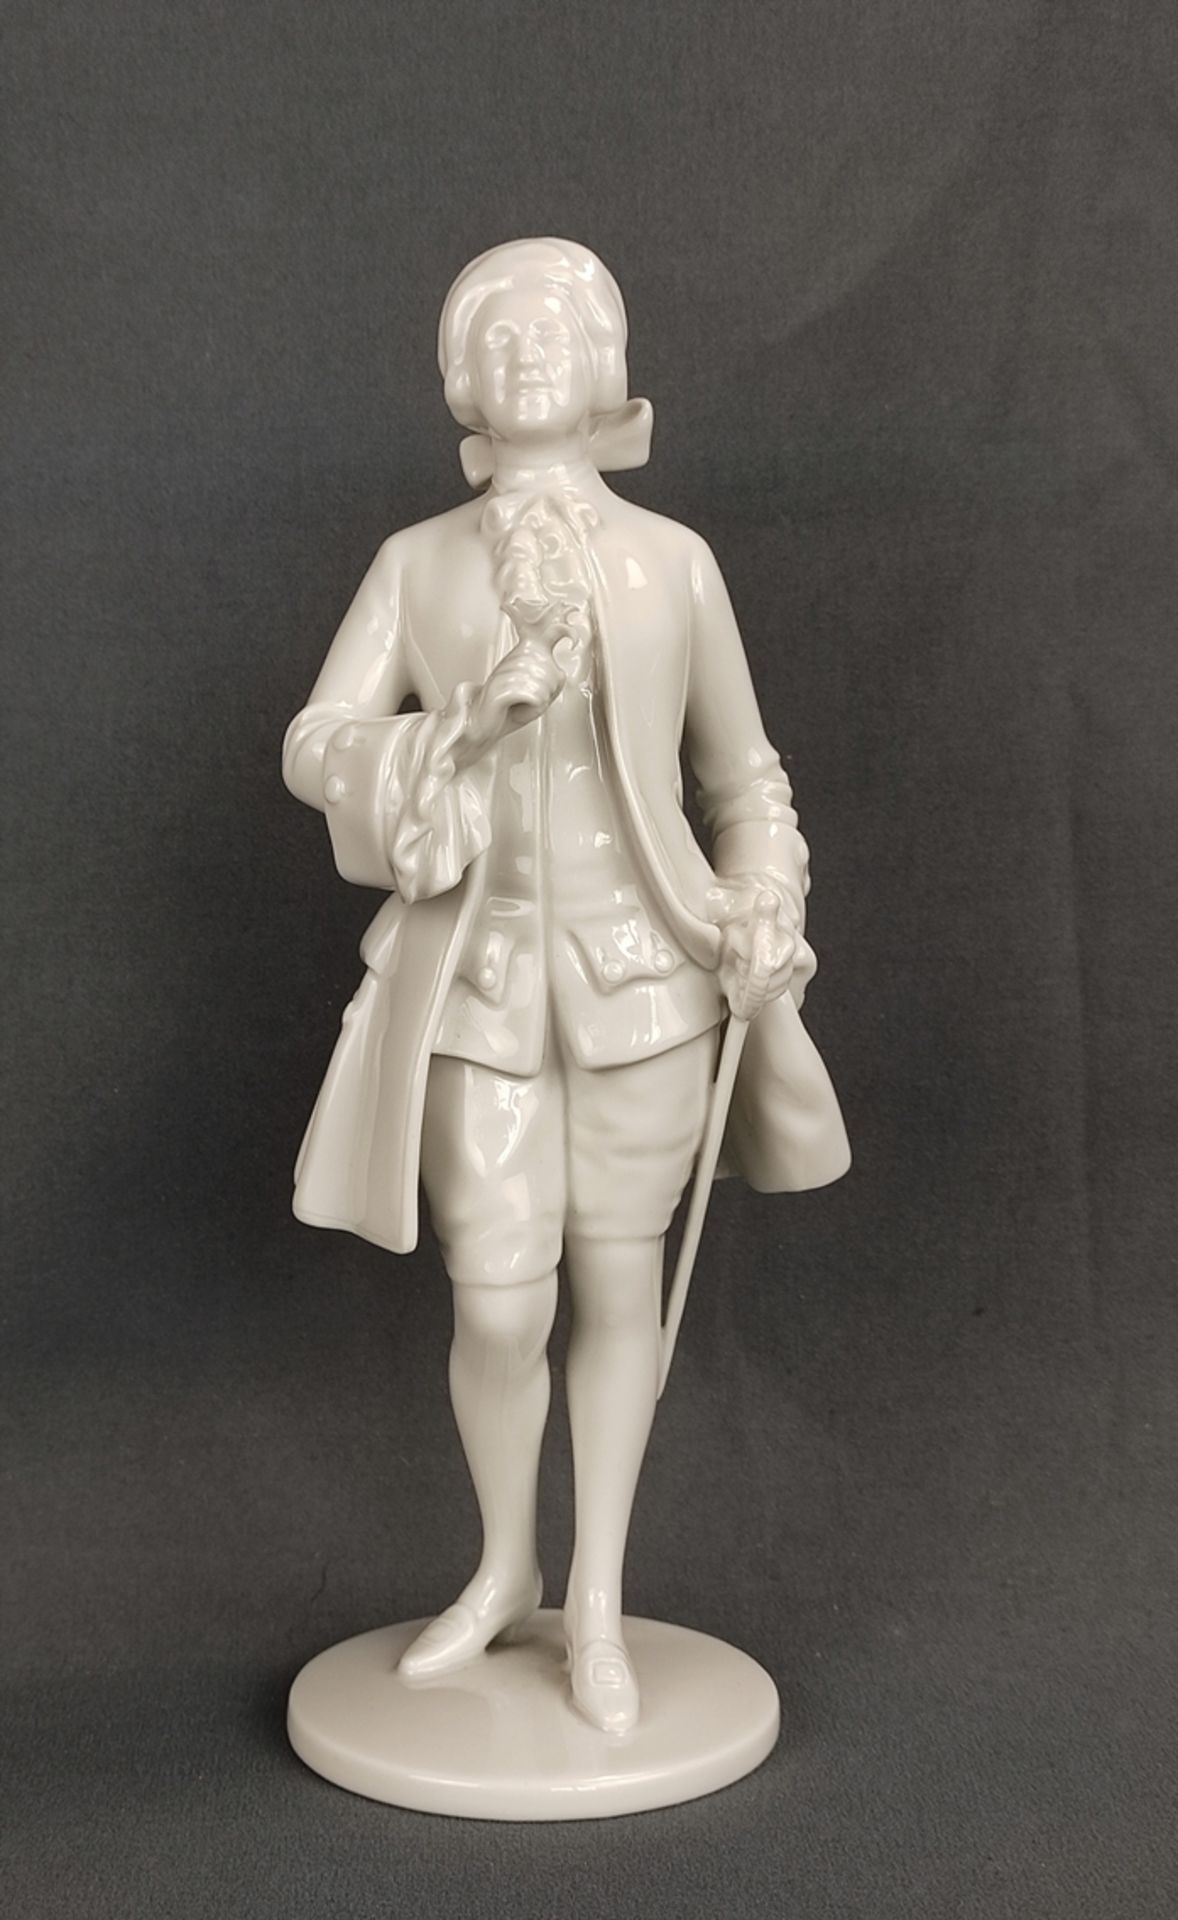 Cavalier, standing on disc stand with rose in hand, white porcelain, Augarten Vienna, embossed mark